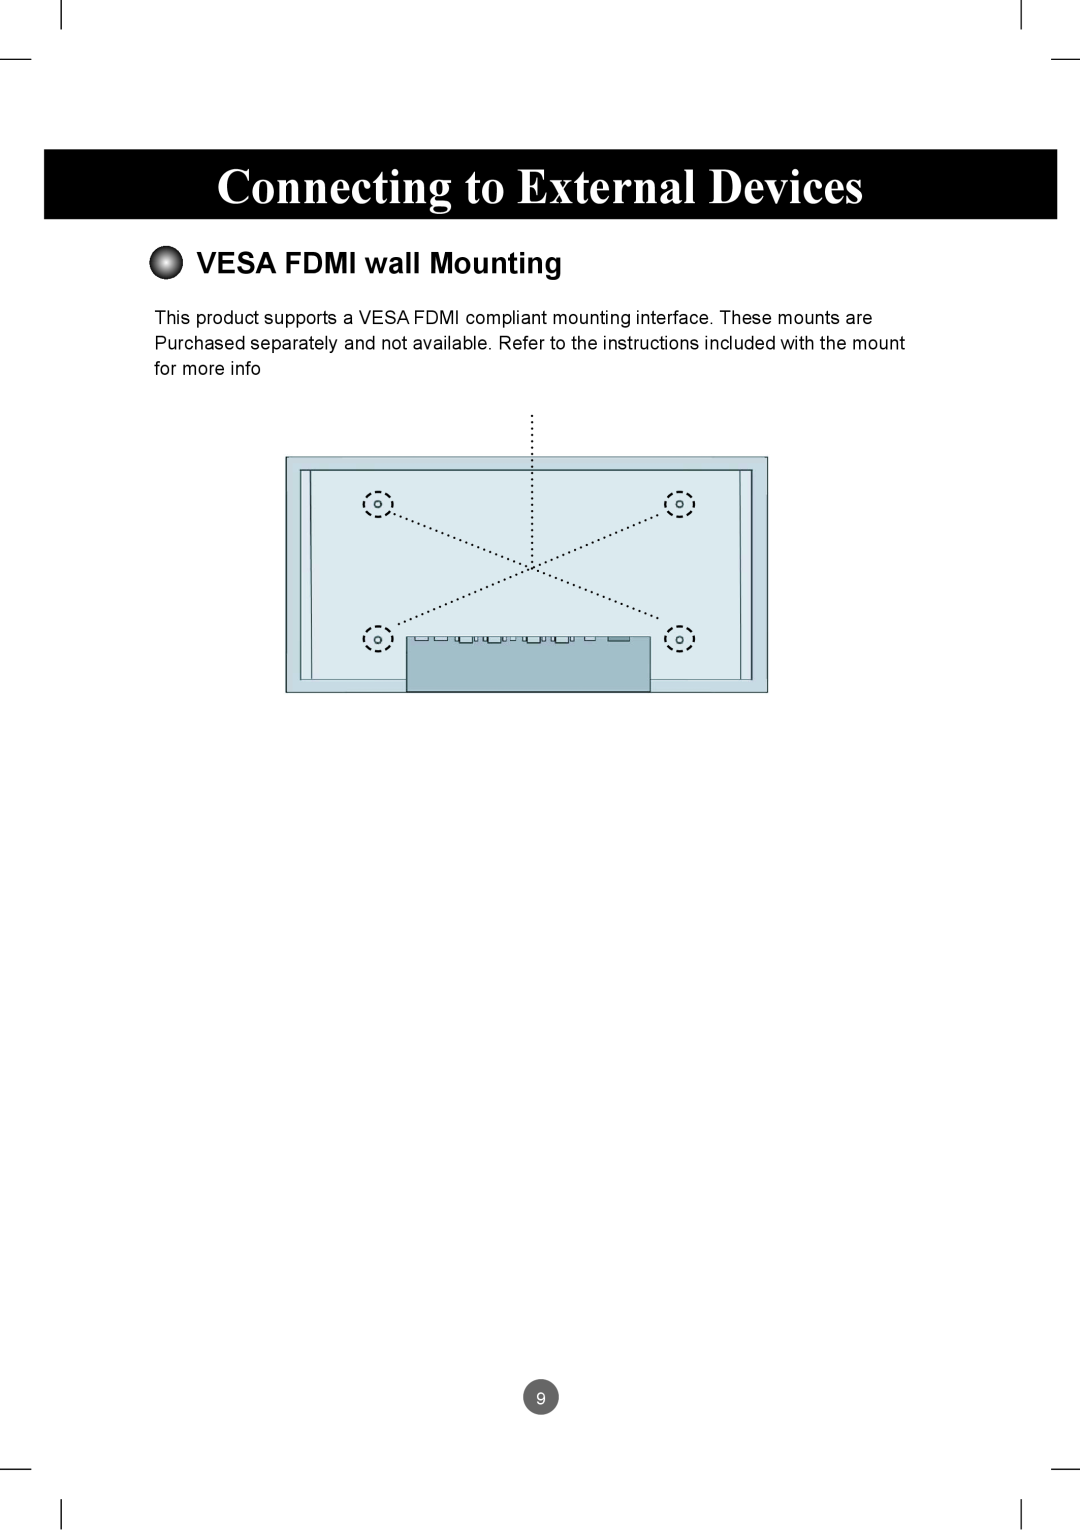 LG Electronics M3801S, M2901S owner manual VESA FDMI wall Mounting, Connecting to External Devices 